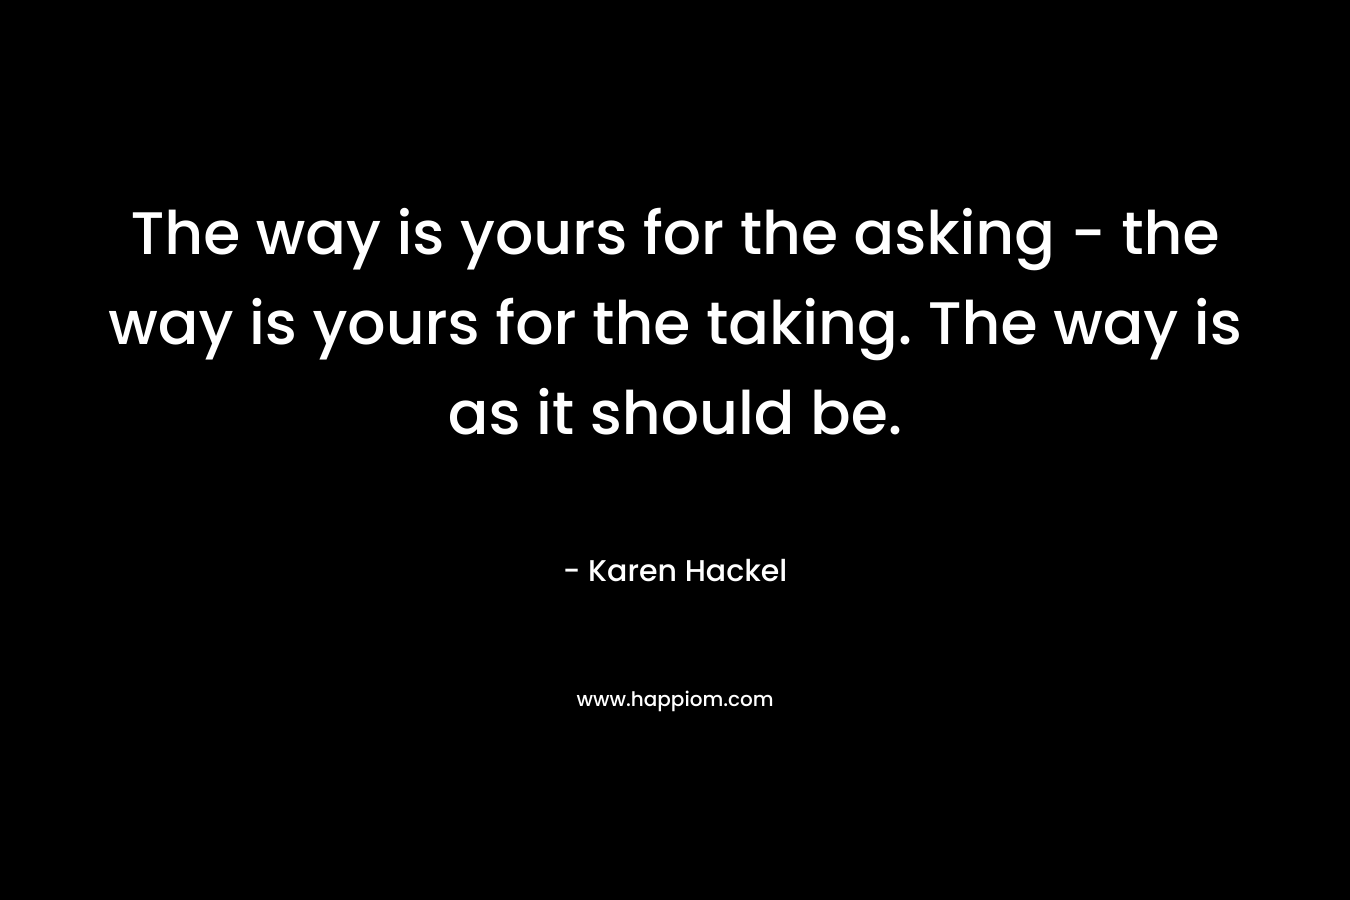 The way is yours for the asking – the way is yours for the taking. The way is as it should be. – Karen Hackel